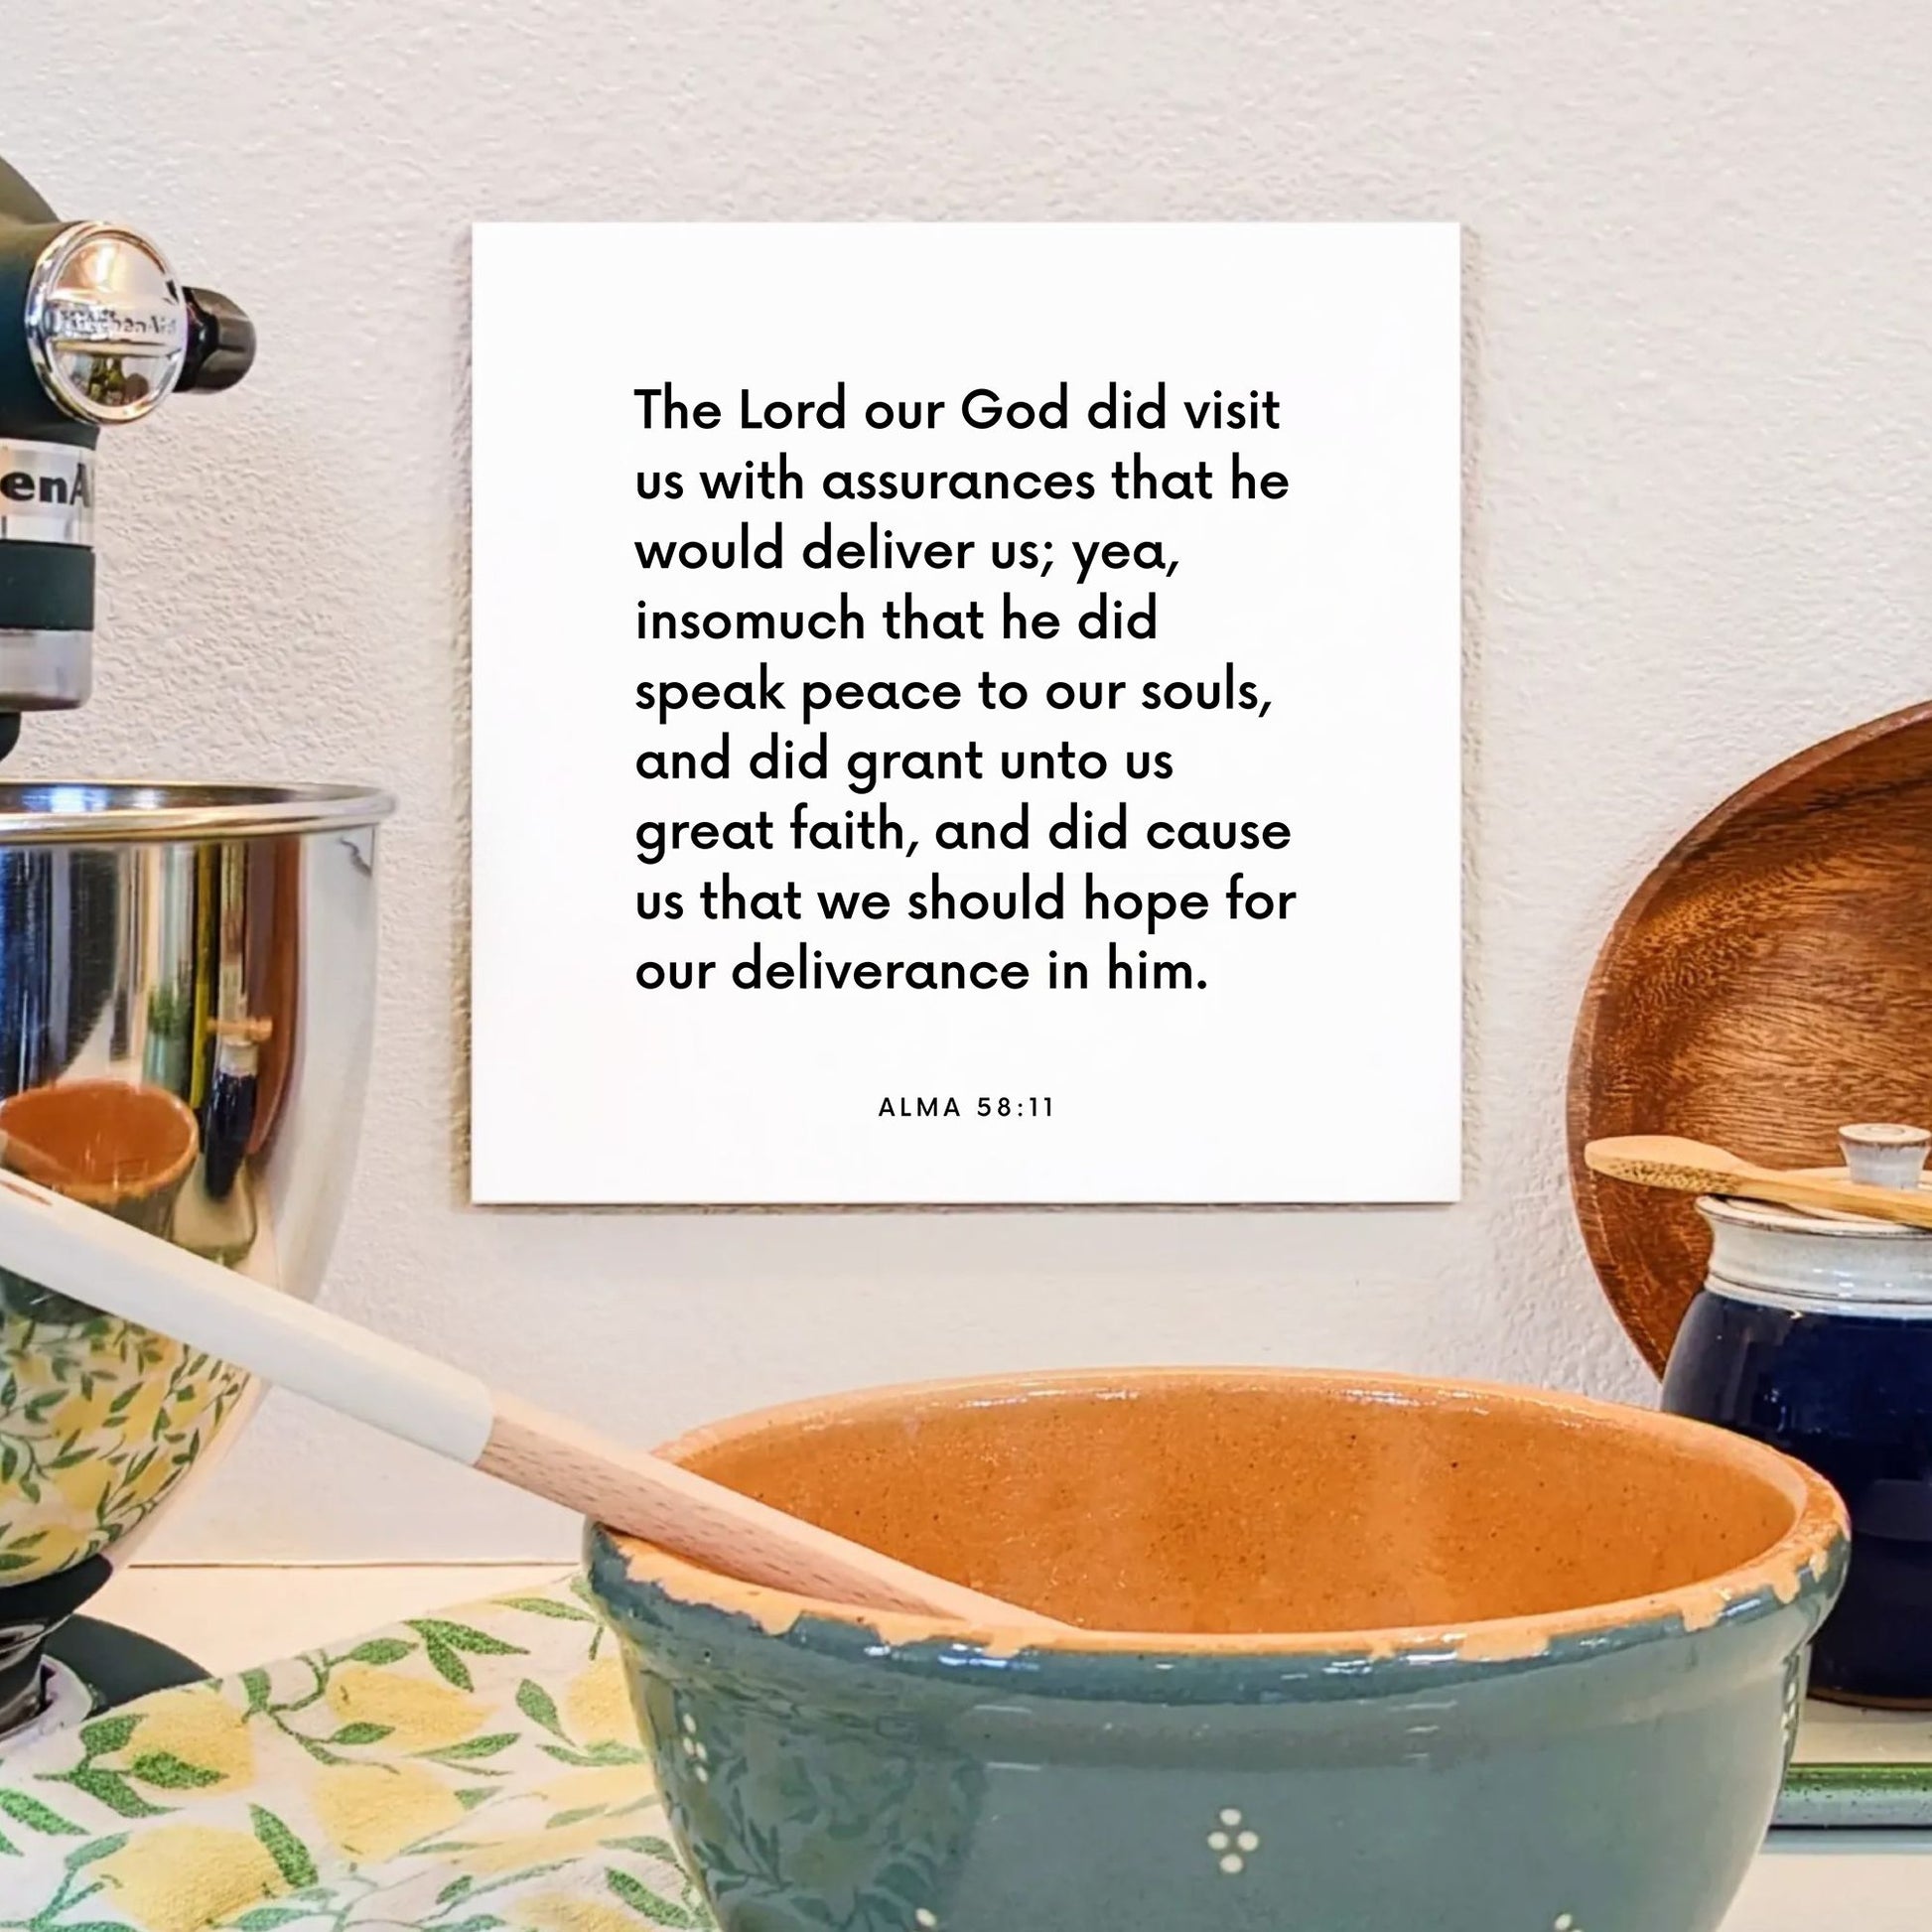 Kitchen mouting of the scripture tile for Alma 58:11 - "He did speak peace to our souls"